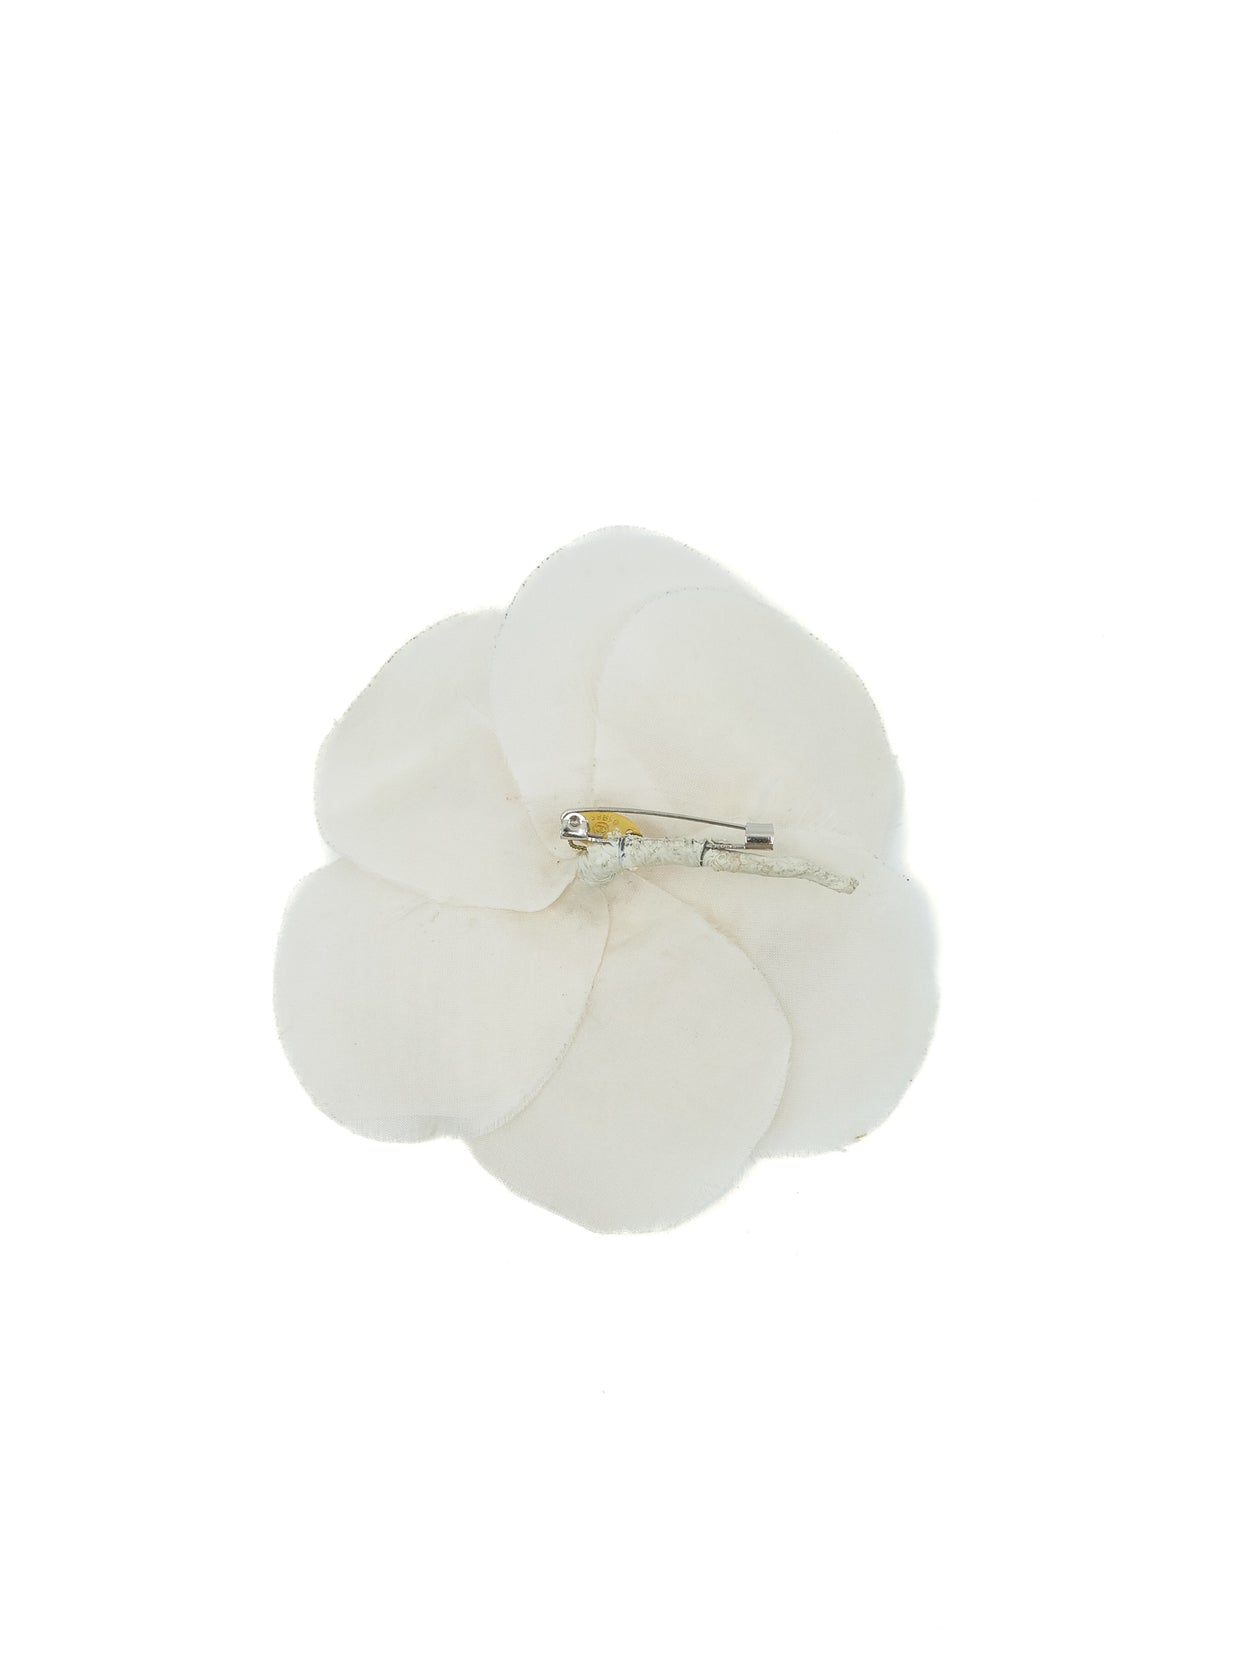 Auth CHANEL Haute Couture White Camellia Brooch Vintage 